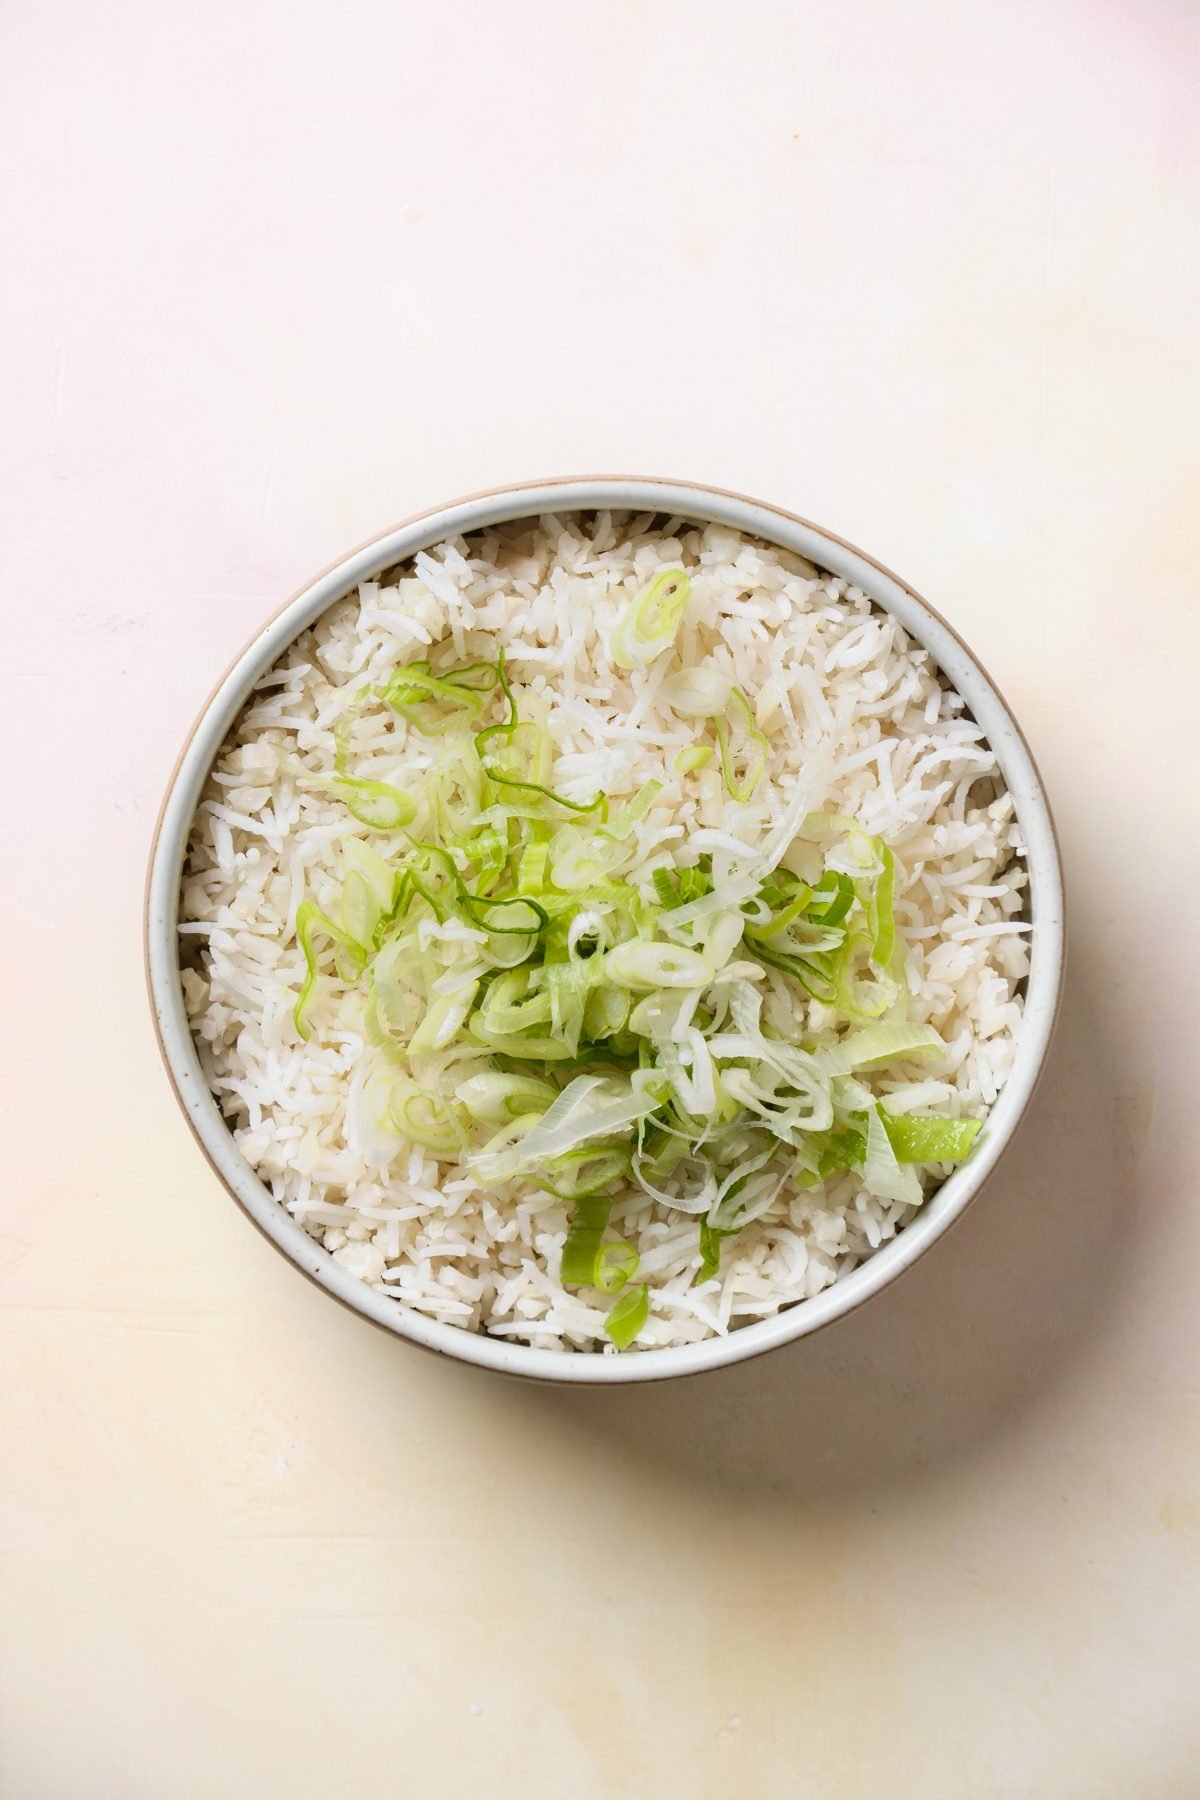 Rice topped with sliced green vegetables.